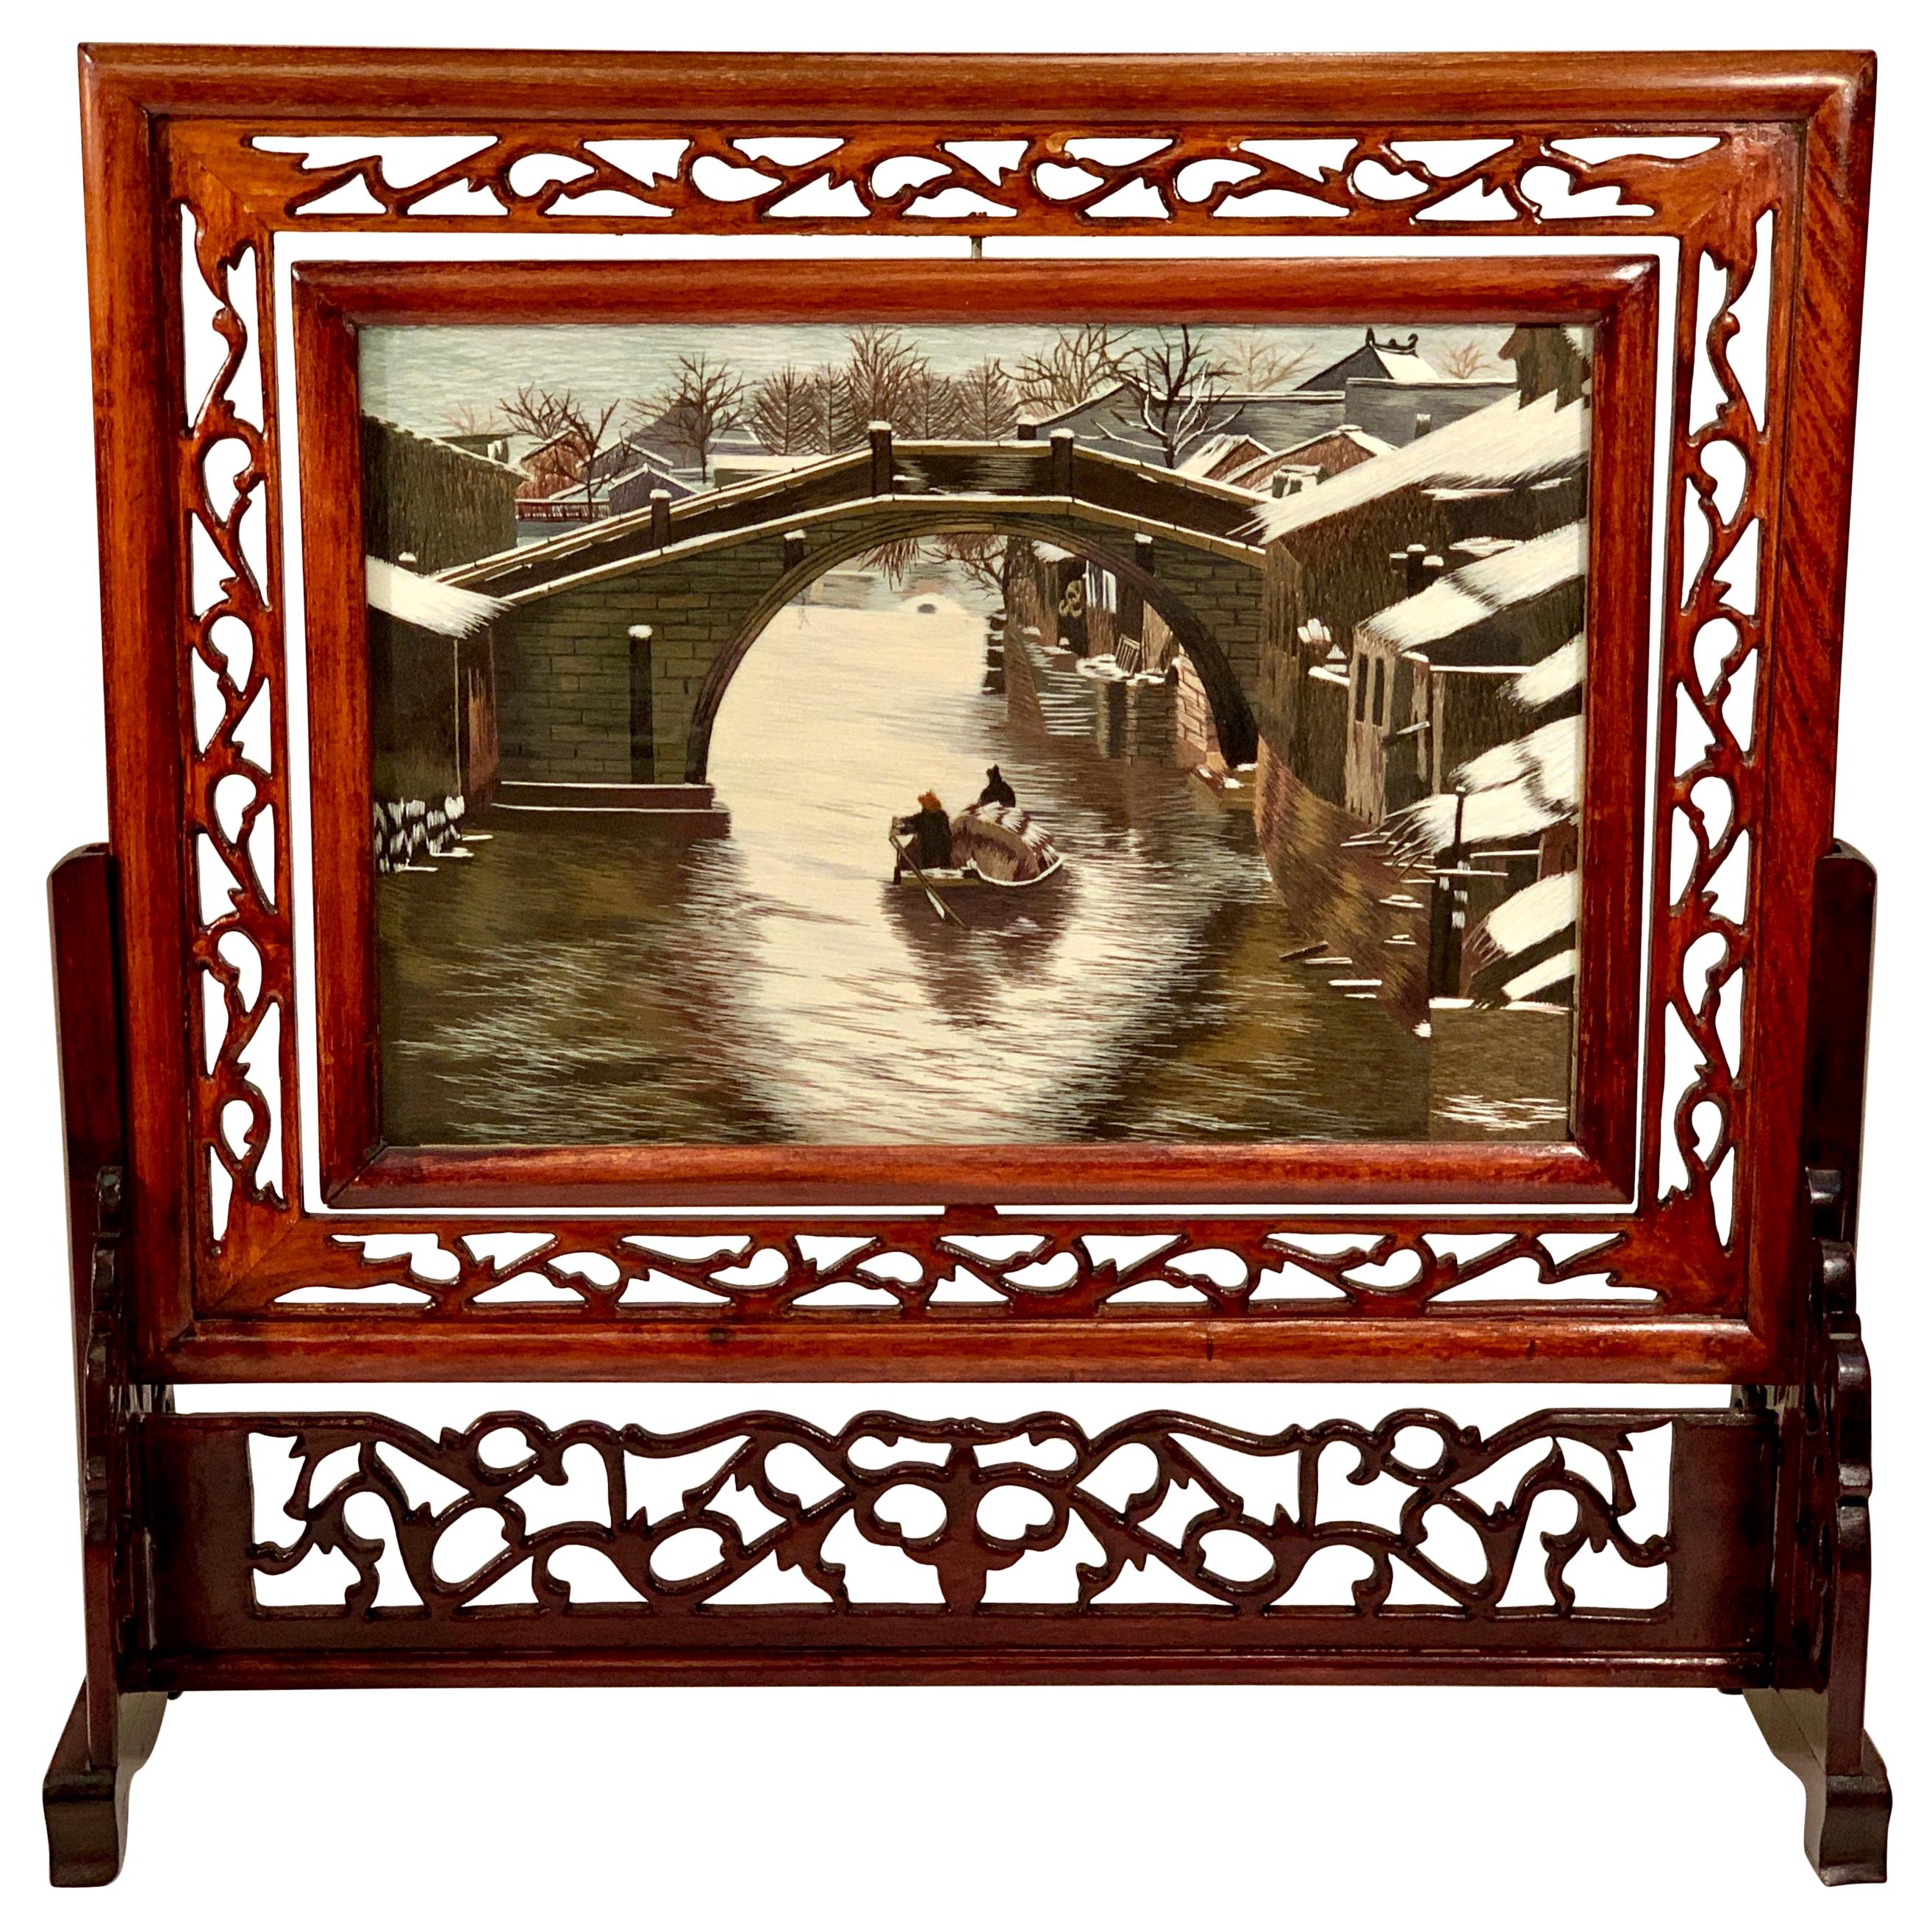 Chinese Su Double Sided Silk Embroidery Landscape Work of Art in Rosewood Frame